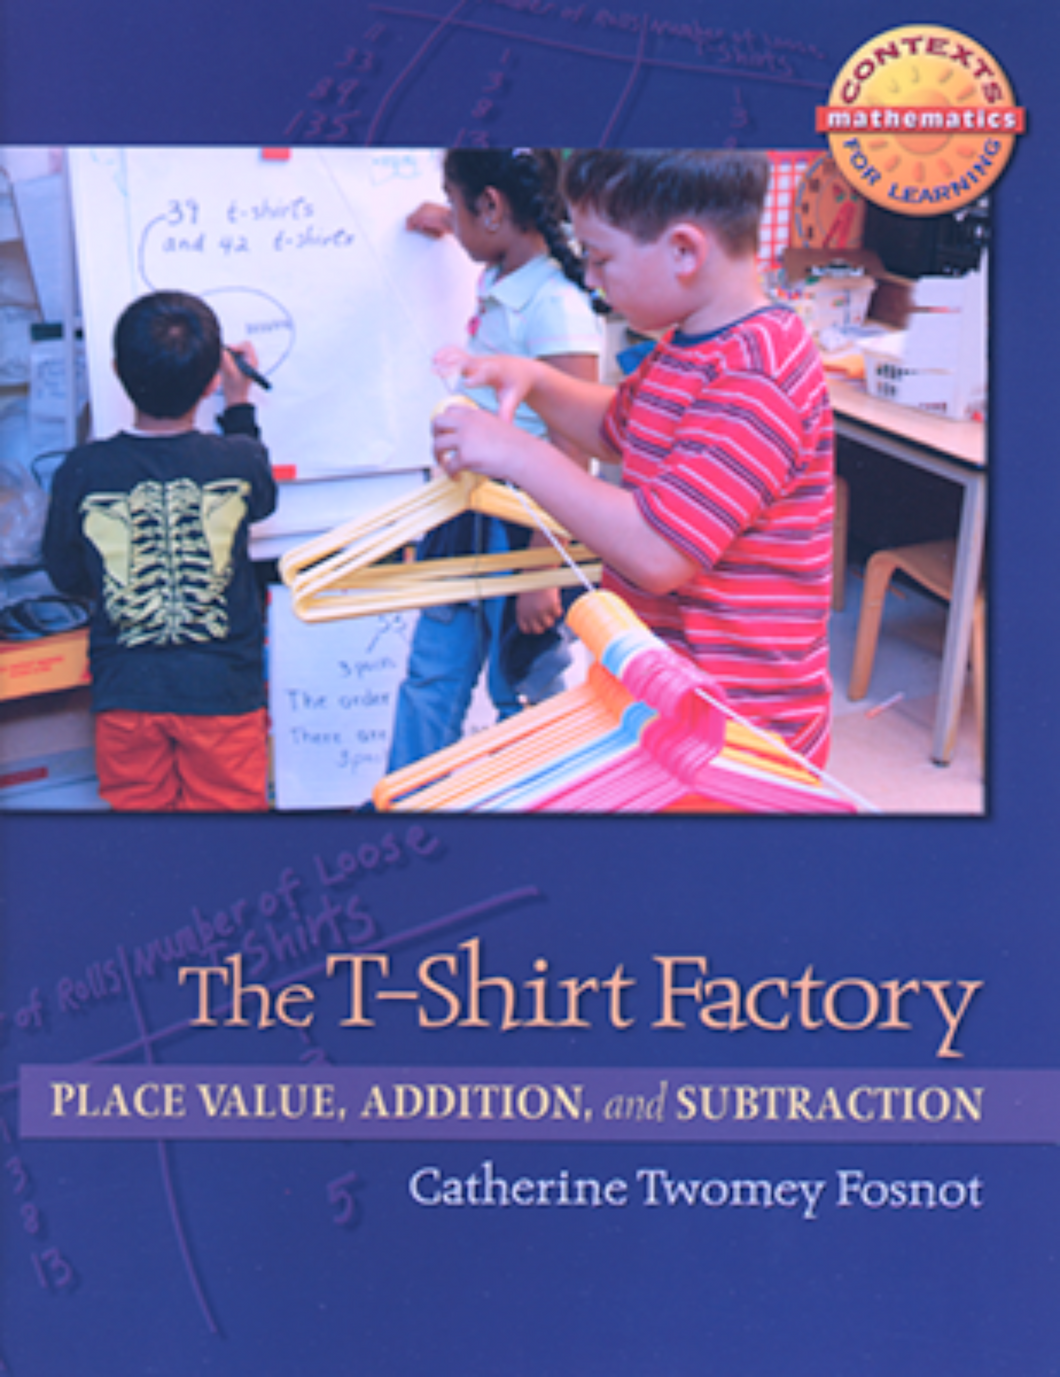 The T-Shirt Factory - Place Value, Addition and Subtraction